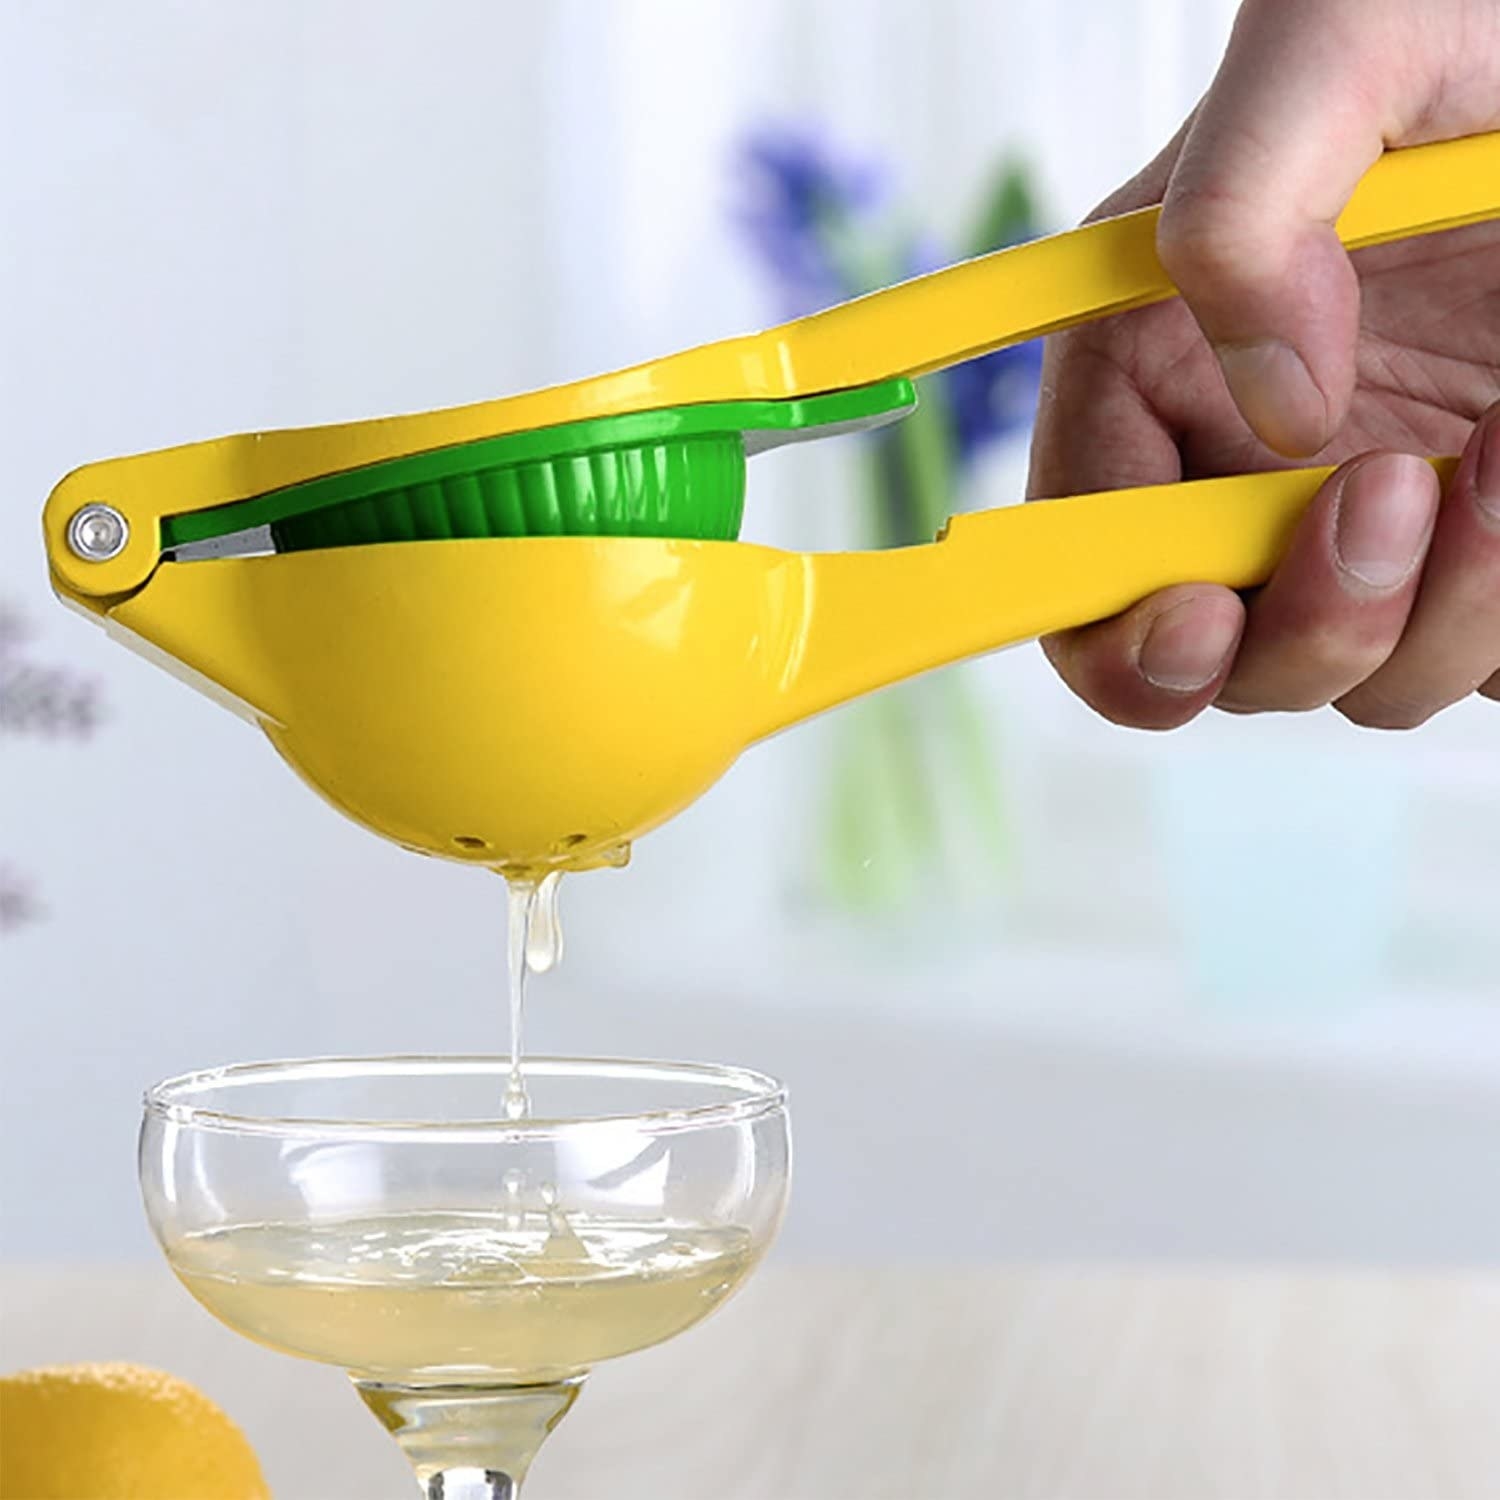 a person squeezing juice from a lemon into a glass